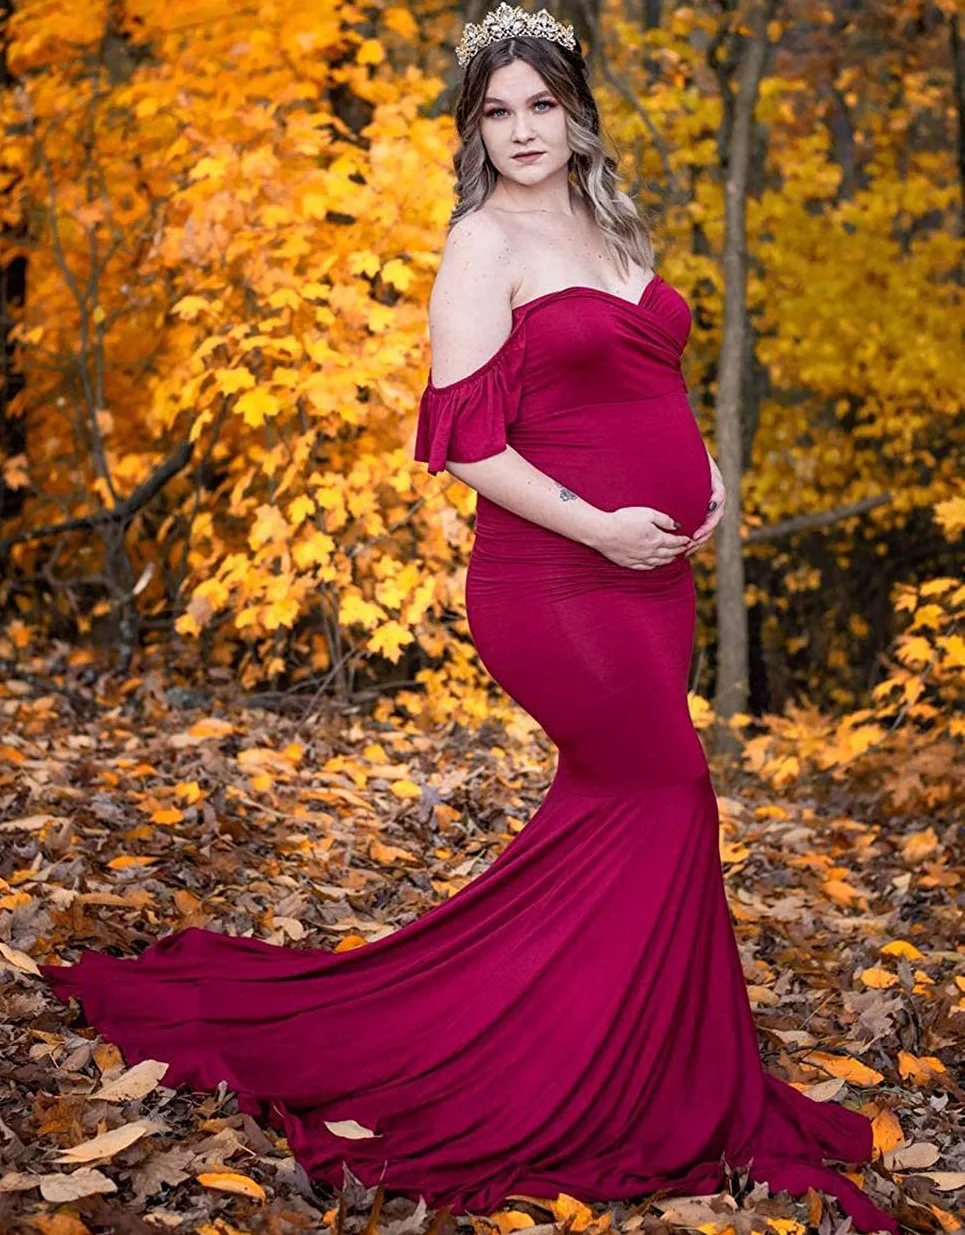 Shoulderless Maternity Dresses For Photo Shoot Sexy Ruffles Sleeve Pregnancy Dress New Maxi Gown Pregnant Women Photography Prop (12)